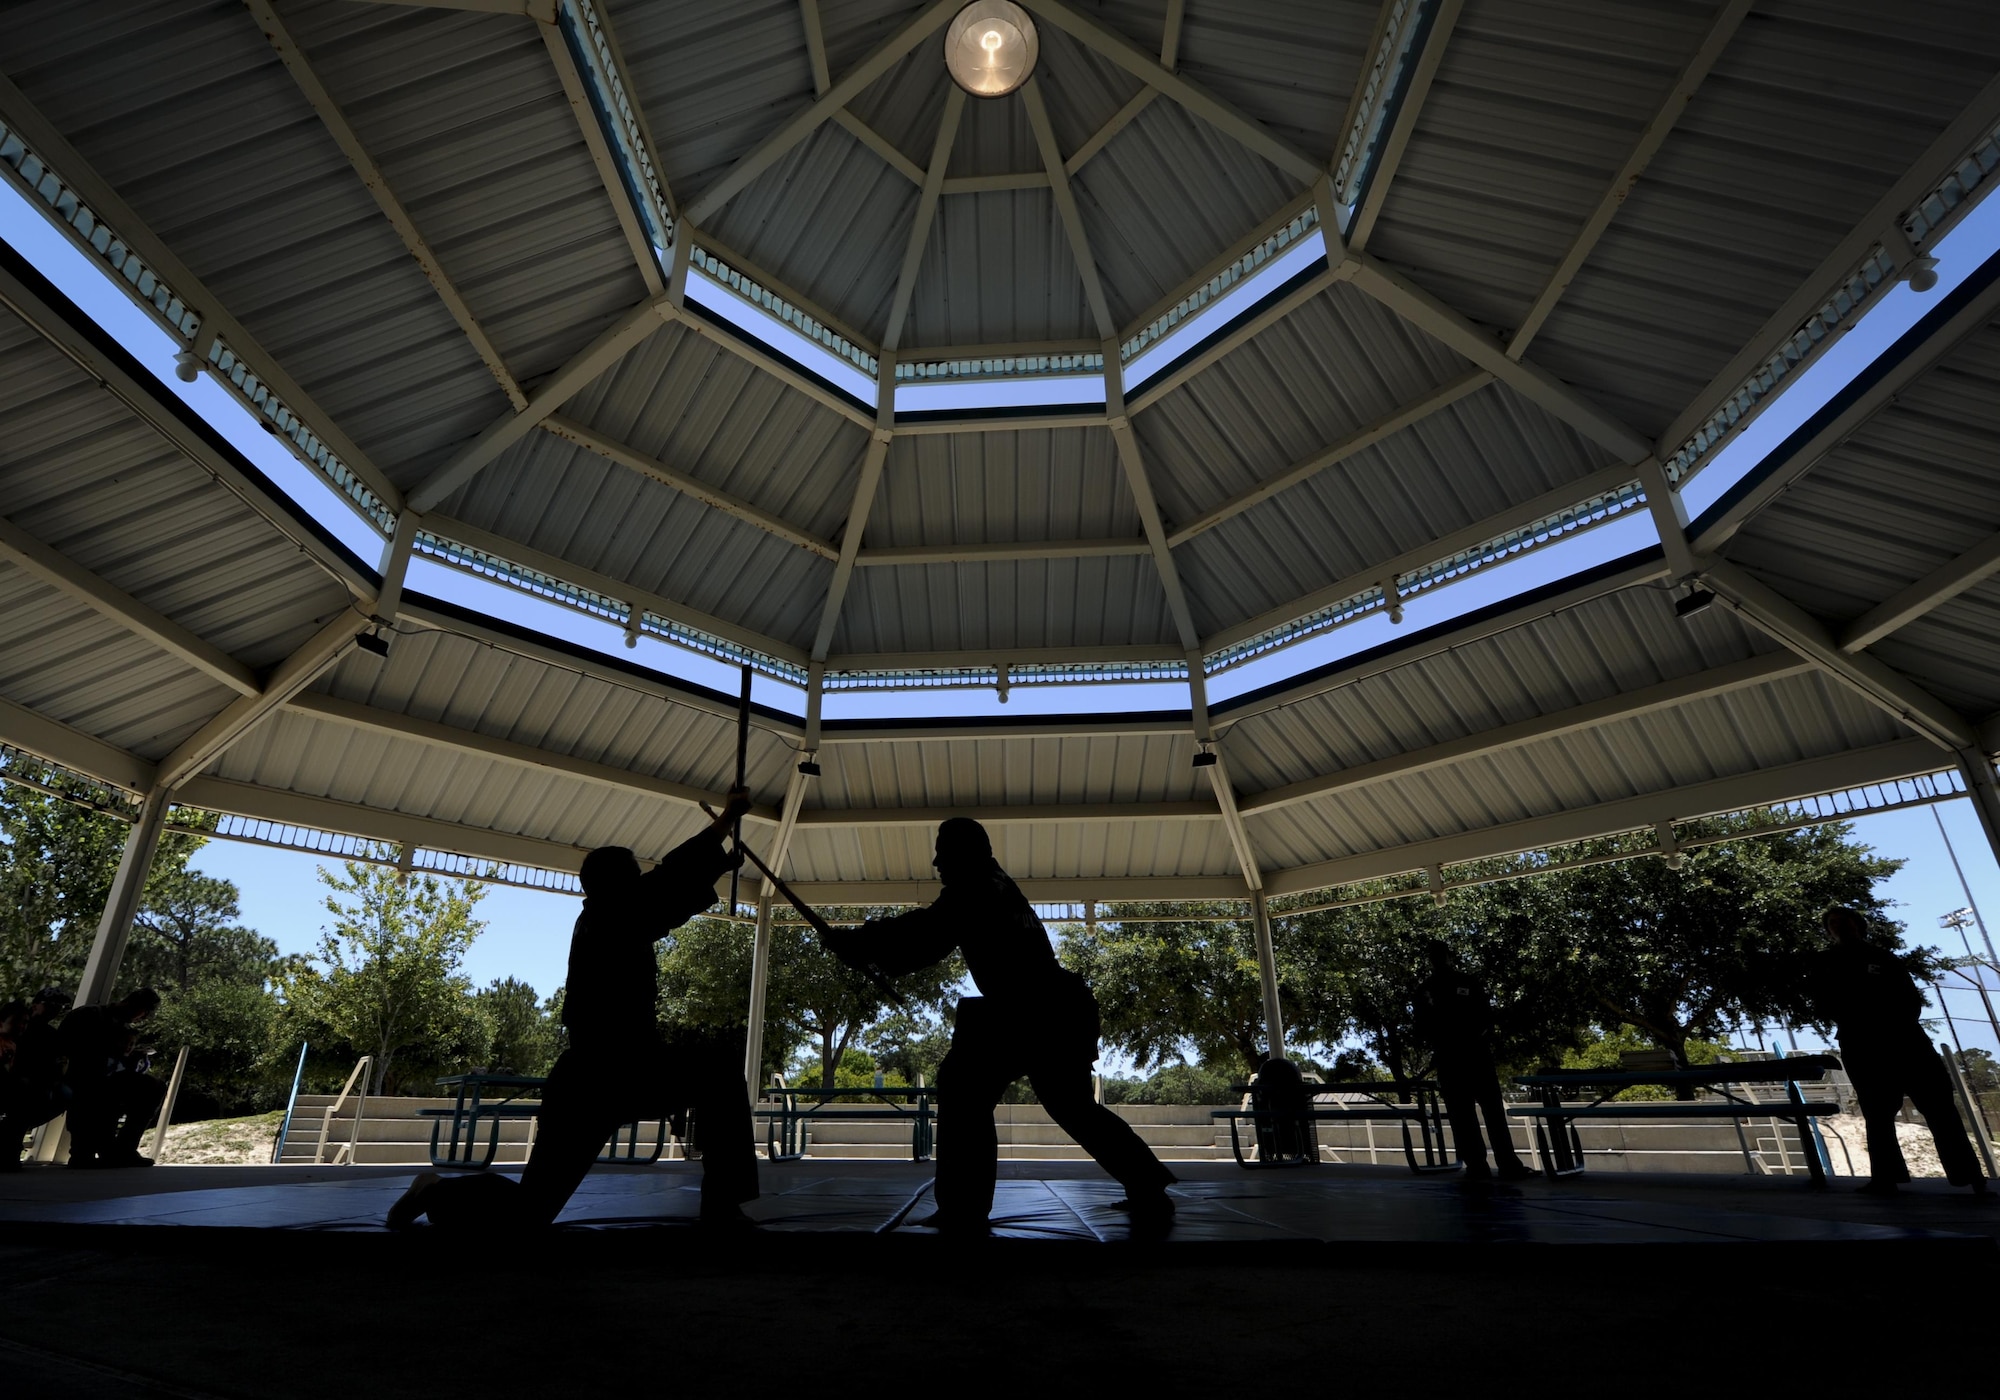 An Airmen with the 25th Intelligence Squadron and Amado Garcia, a Kuk Sool Won instructor, perform a Kuk Sool Won demonstration during the Asian American and Pacific Islander Cultural Day event at Hurlburt Field, Fla., May 25, 2017. Kuk Sool Won is a martial art system that was founded in 1961. The event included a demonstration, free food and a hula demonstration. (U.S. Air Force photo by Airman 1st Class Dennis Spain)